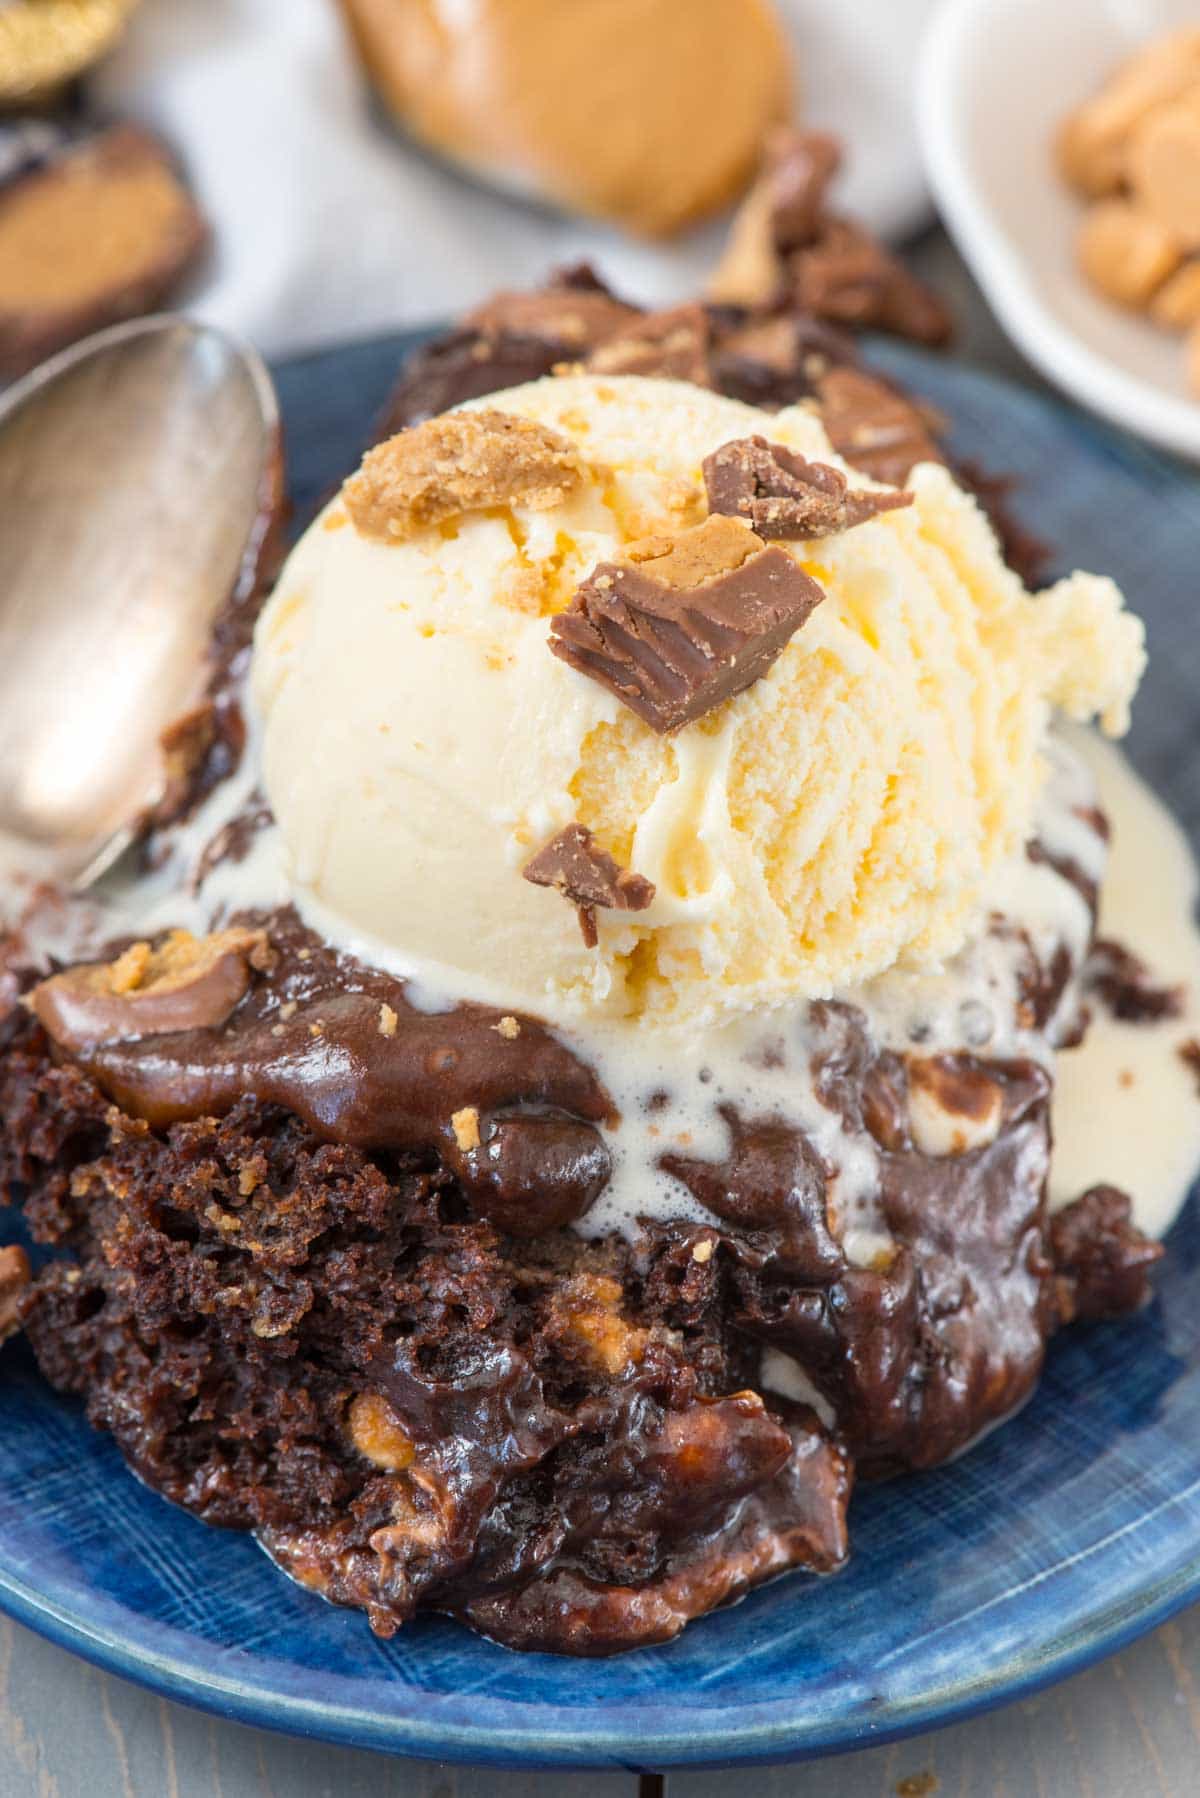 Chocolate Peanut Butter Cup Ice Cream - Brown Eyed Baker